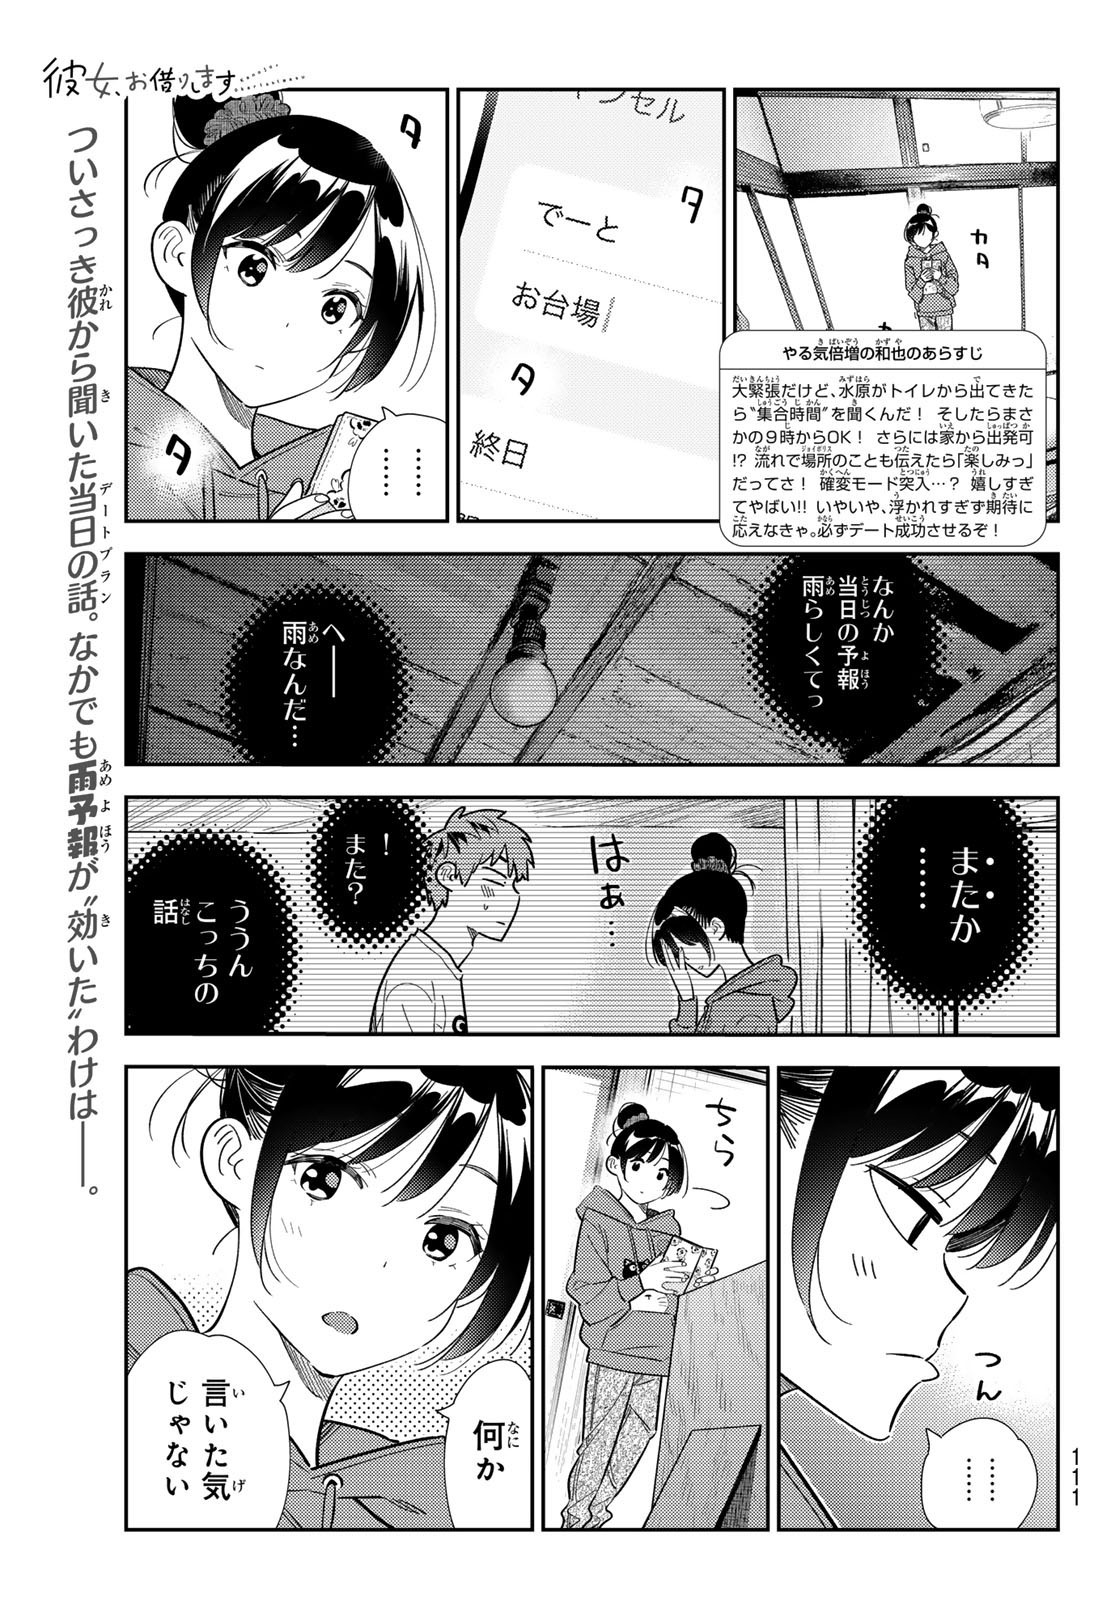 Weekly Shōnen Magazine - 週刊少年マガジン - Chapter 2024-23 - Page 109